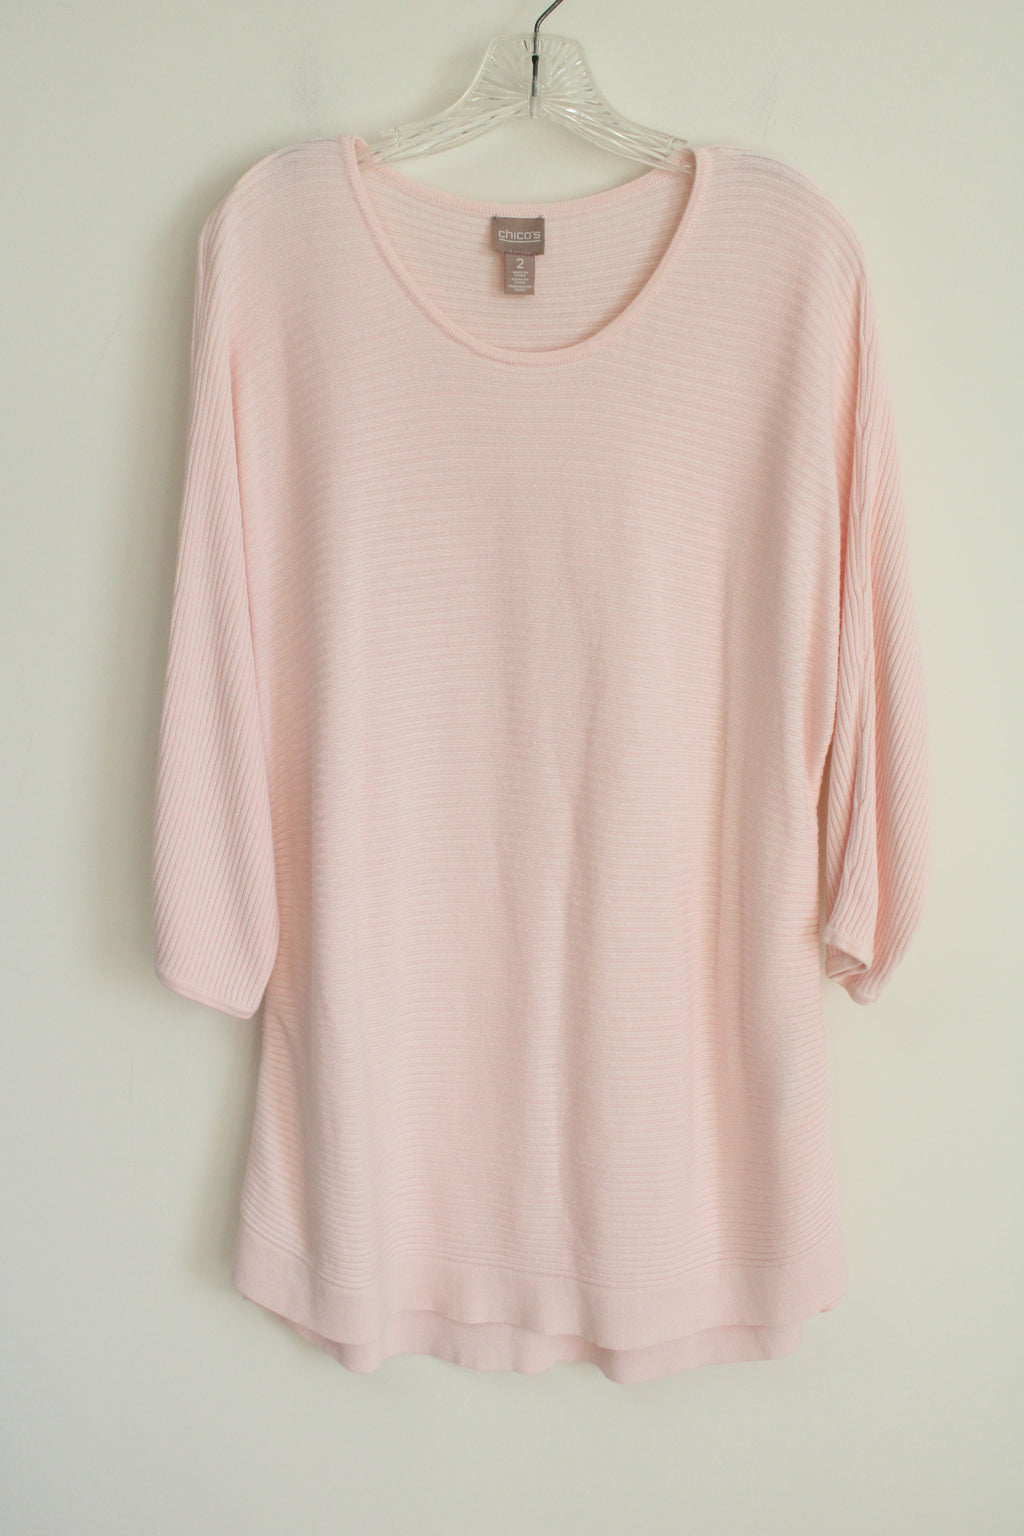 Chico's Light Pink Ribbed Knit Sweater | 2 (L/12)